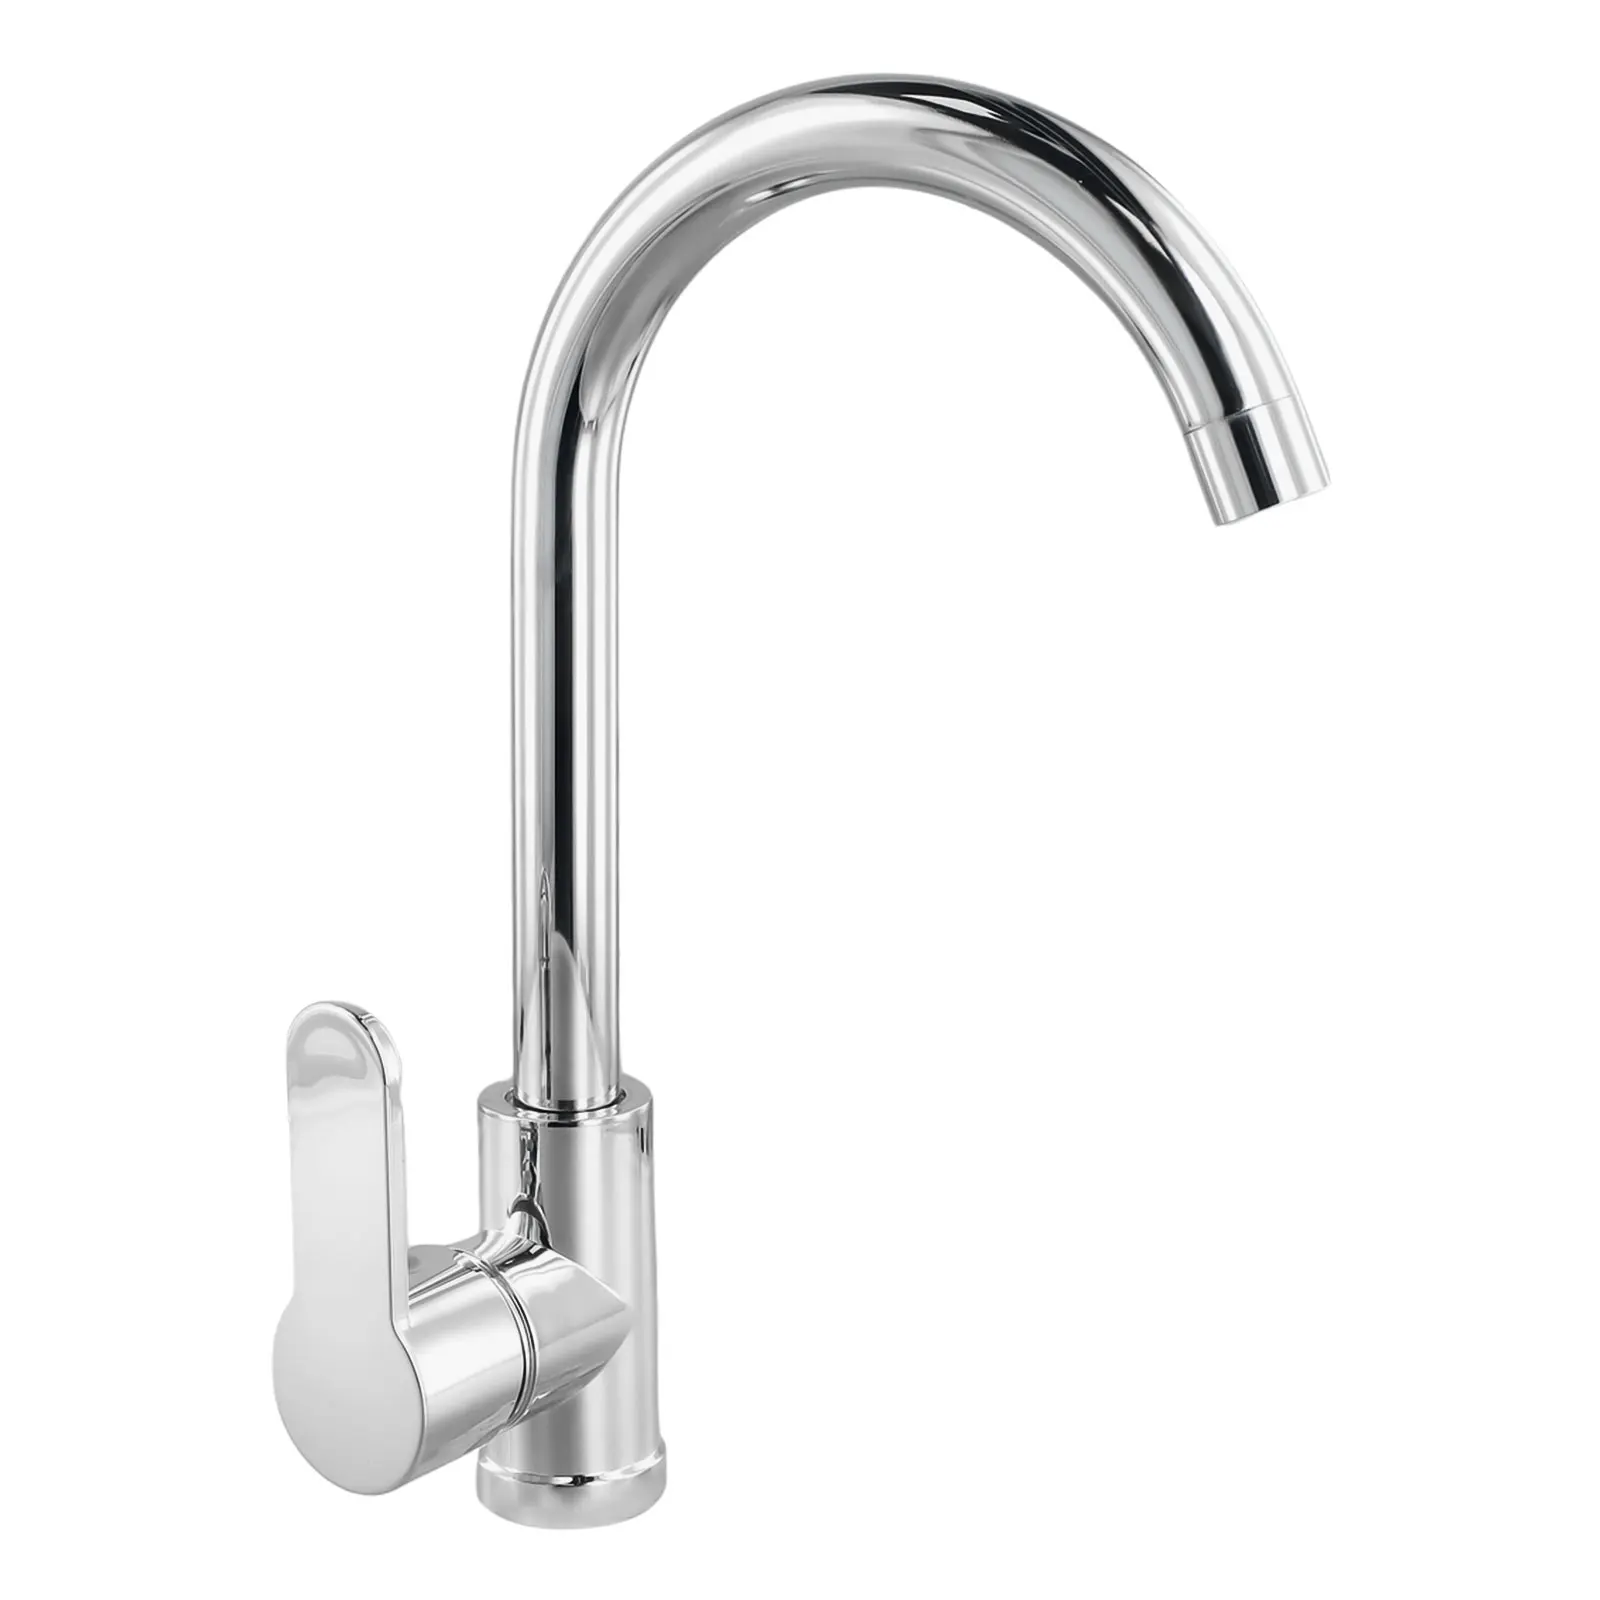 Stainless Steel Kitchen Faucet Polished Chrome Plated Swivel Basin Sink Cold Hot Easy To Operate Mixer Tap